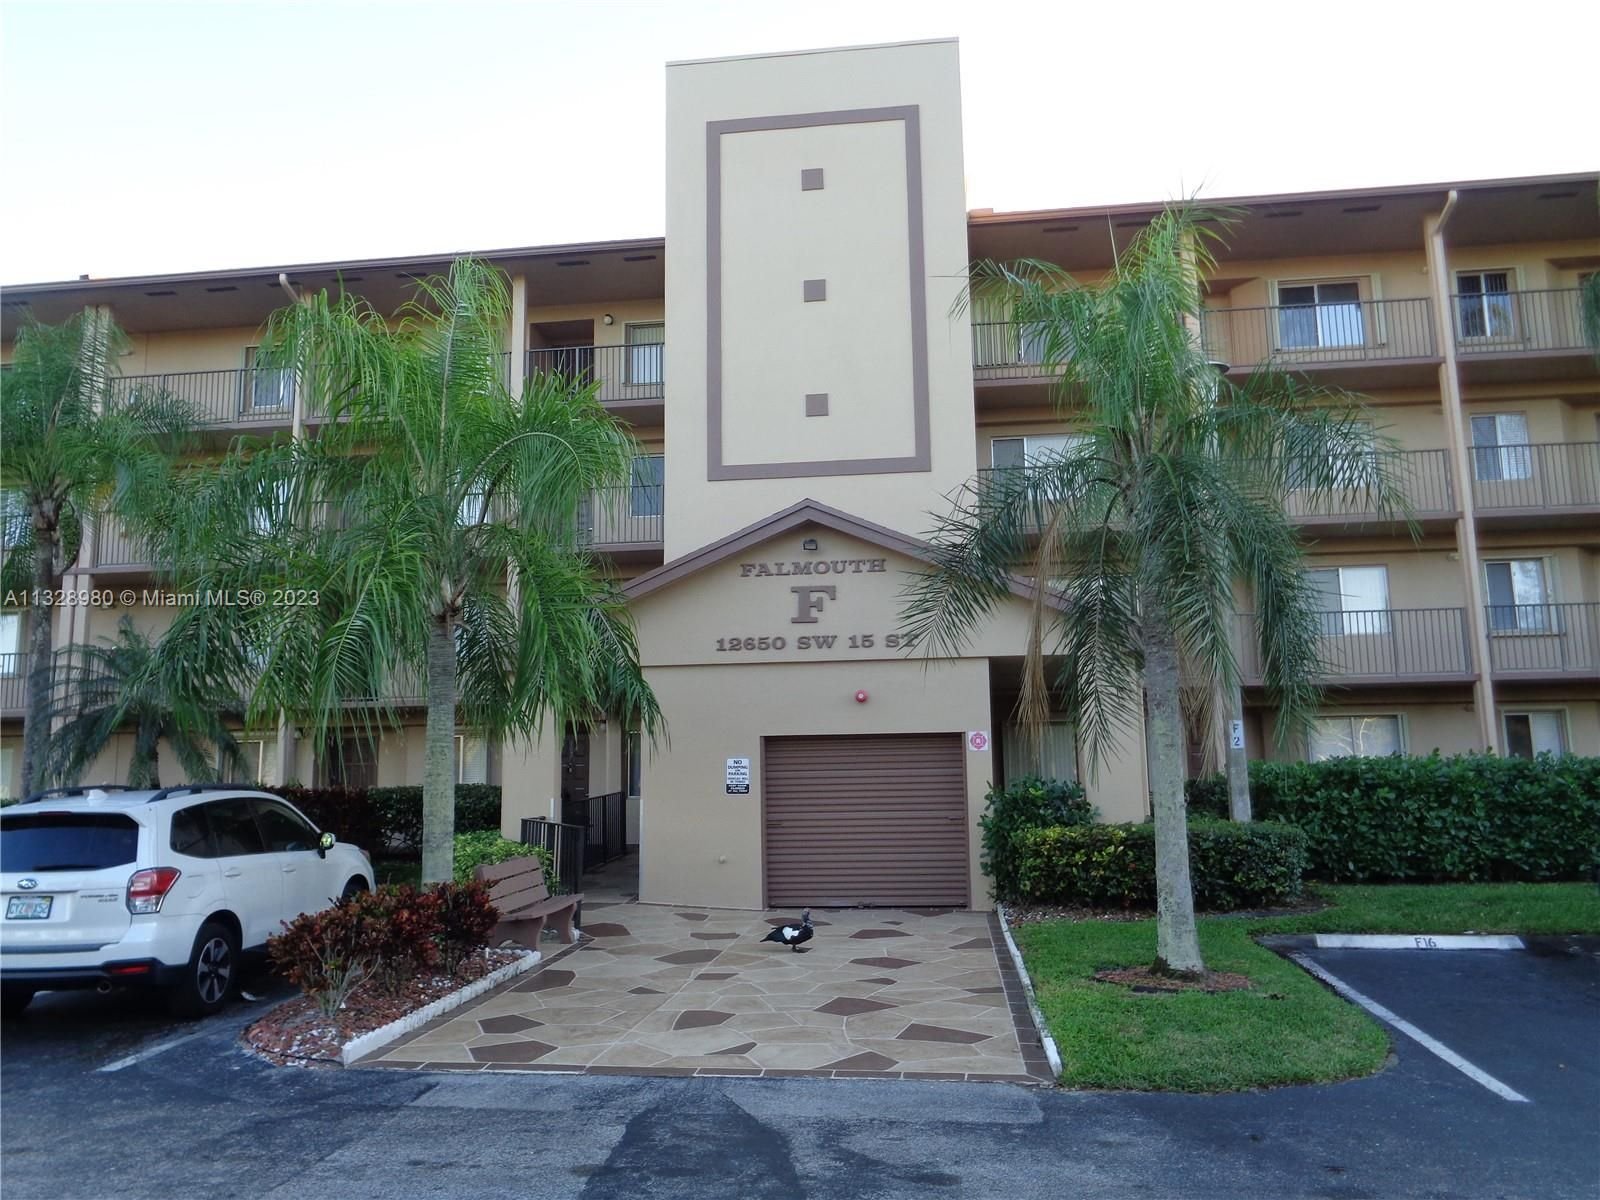 Real estate property located at 12650 15th St #213F, Broward County, Pembroke Pines, FL